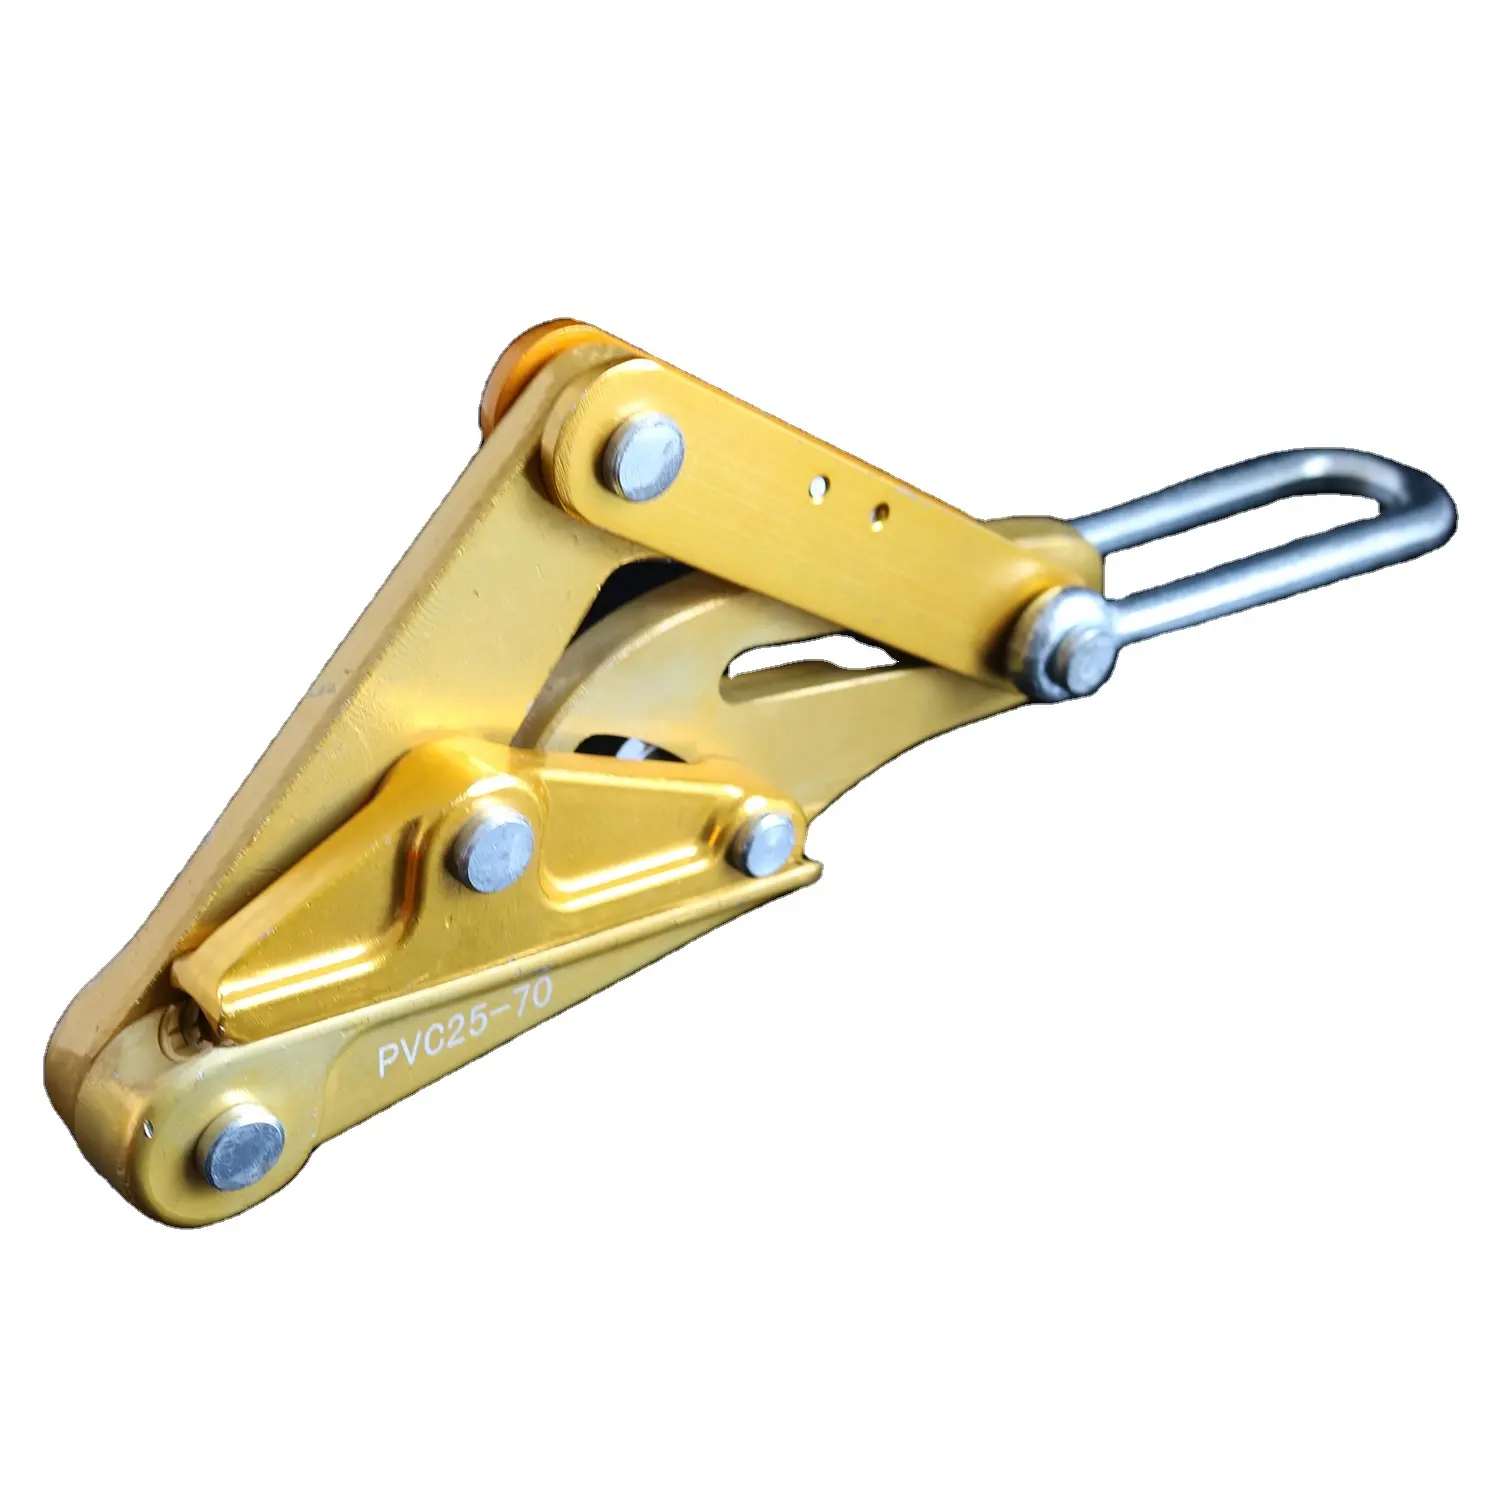 Aluminum Cable Grip Come Along Clamp